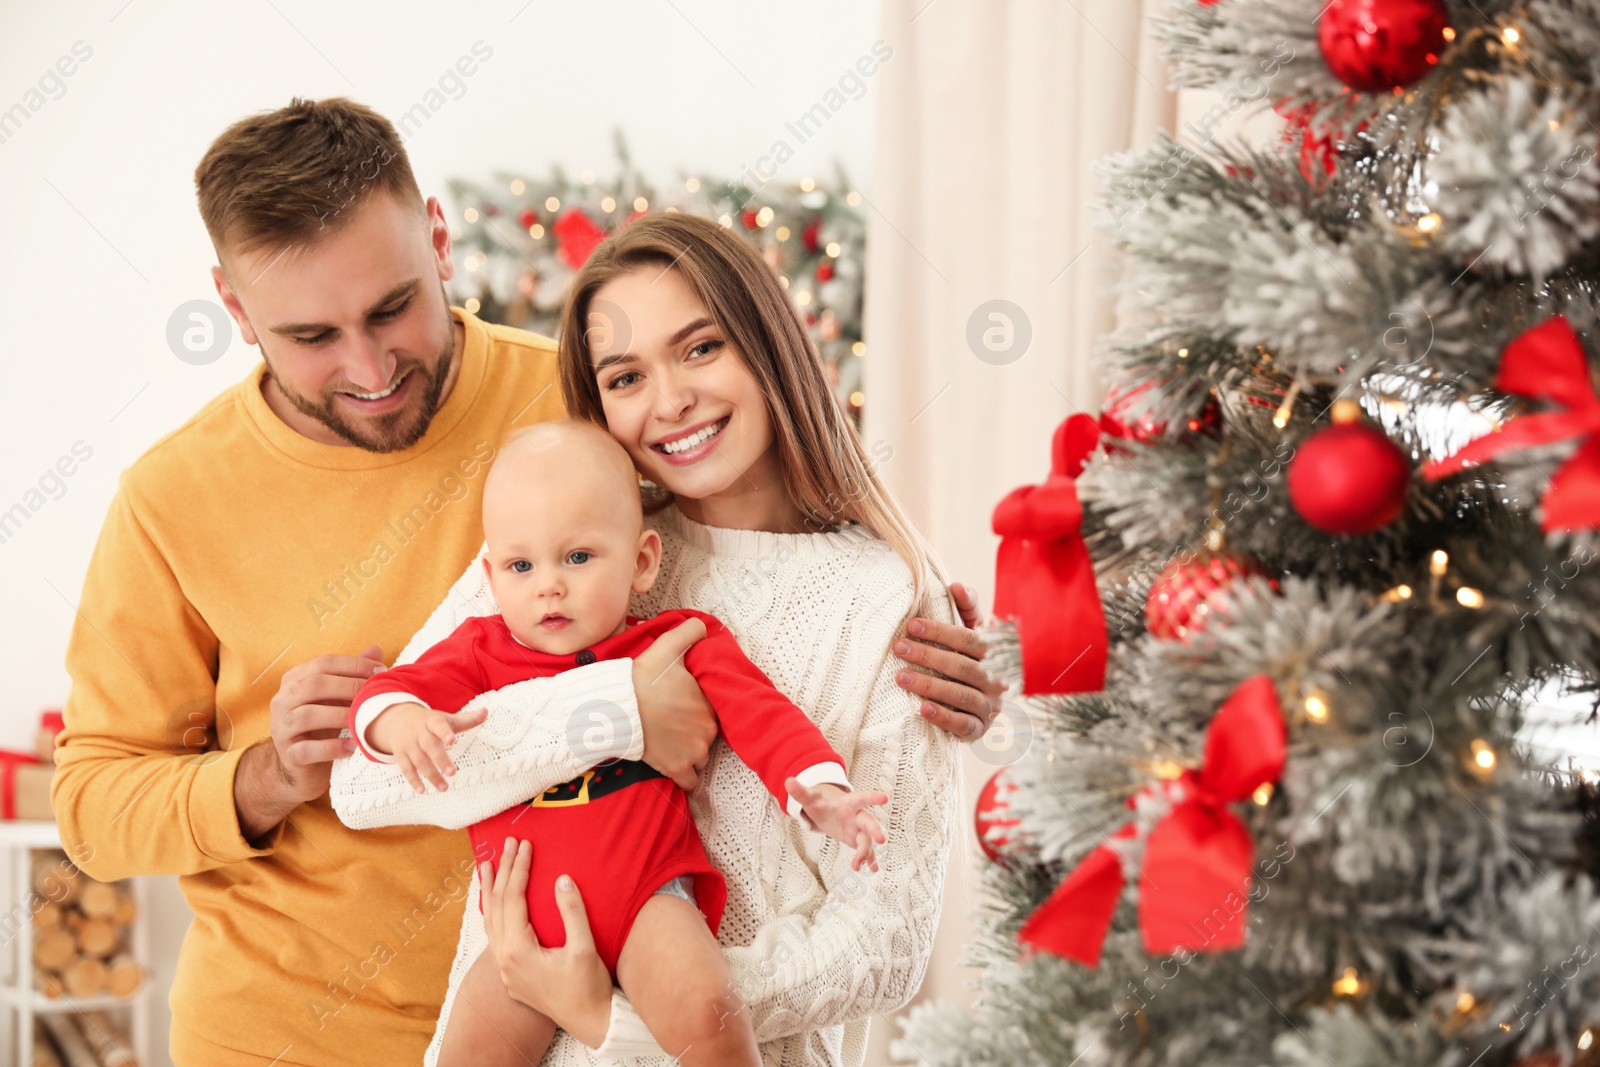 Photo of Happy family with cute baby near decorated Christmas tree at home